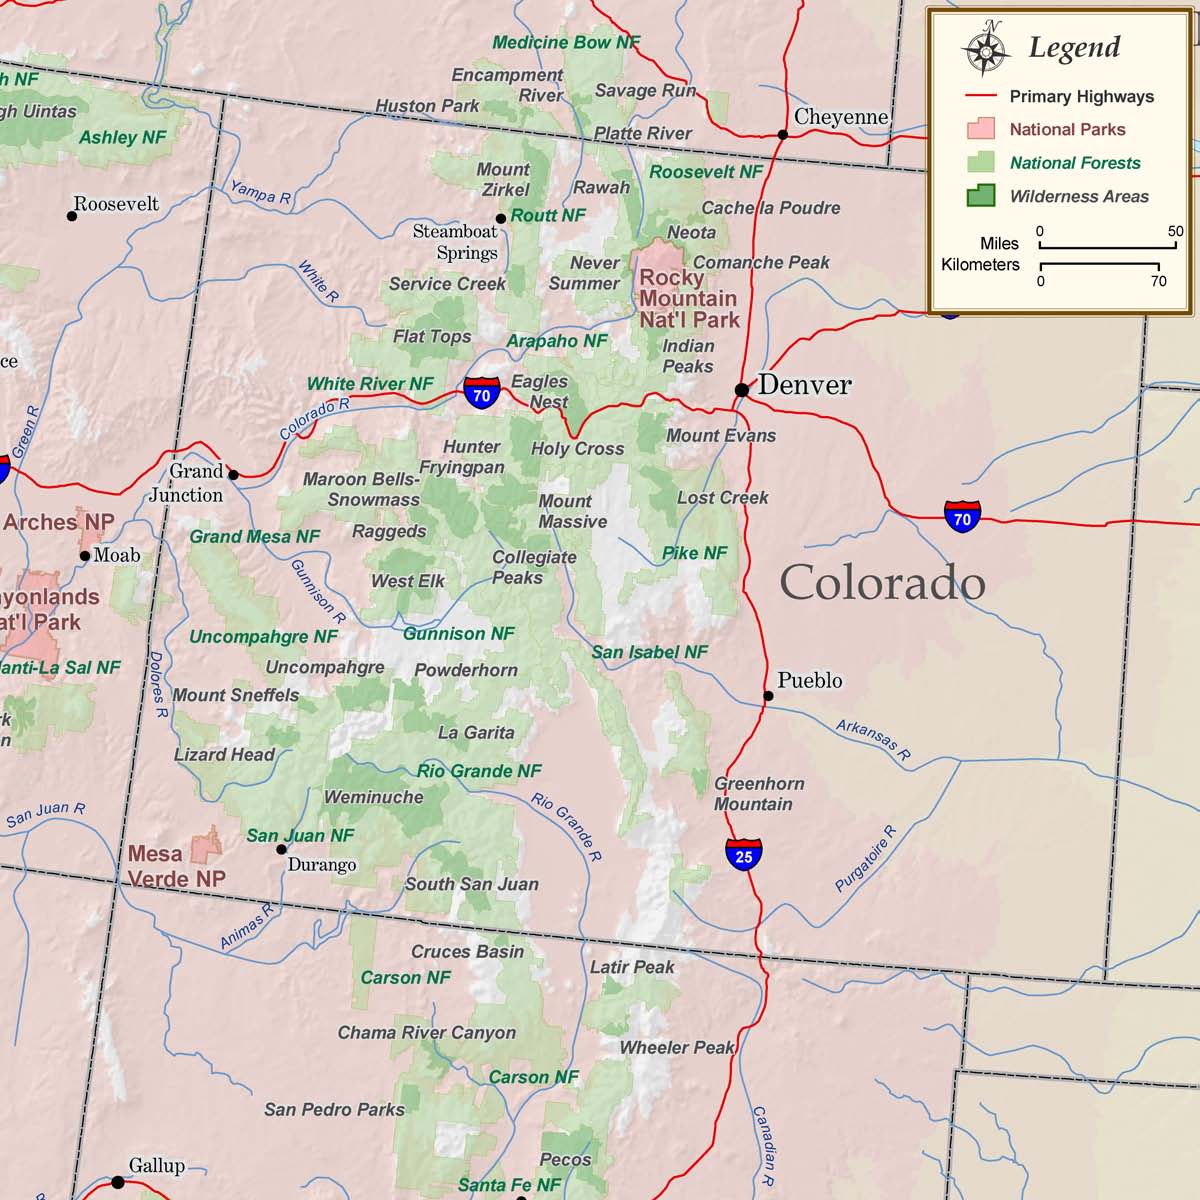 Colorado National Parks Forests Wilderness Map Rocky Mountain